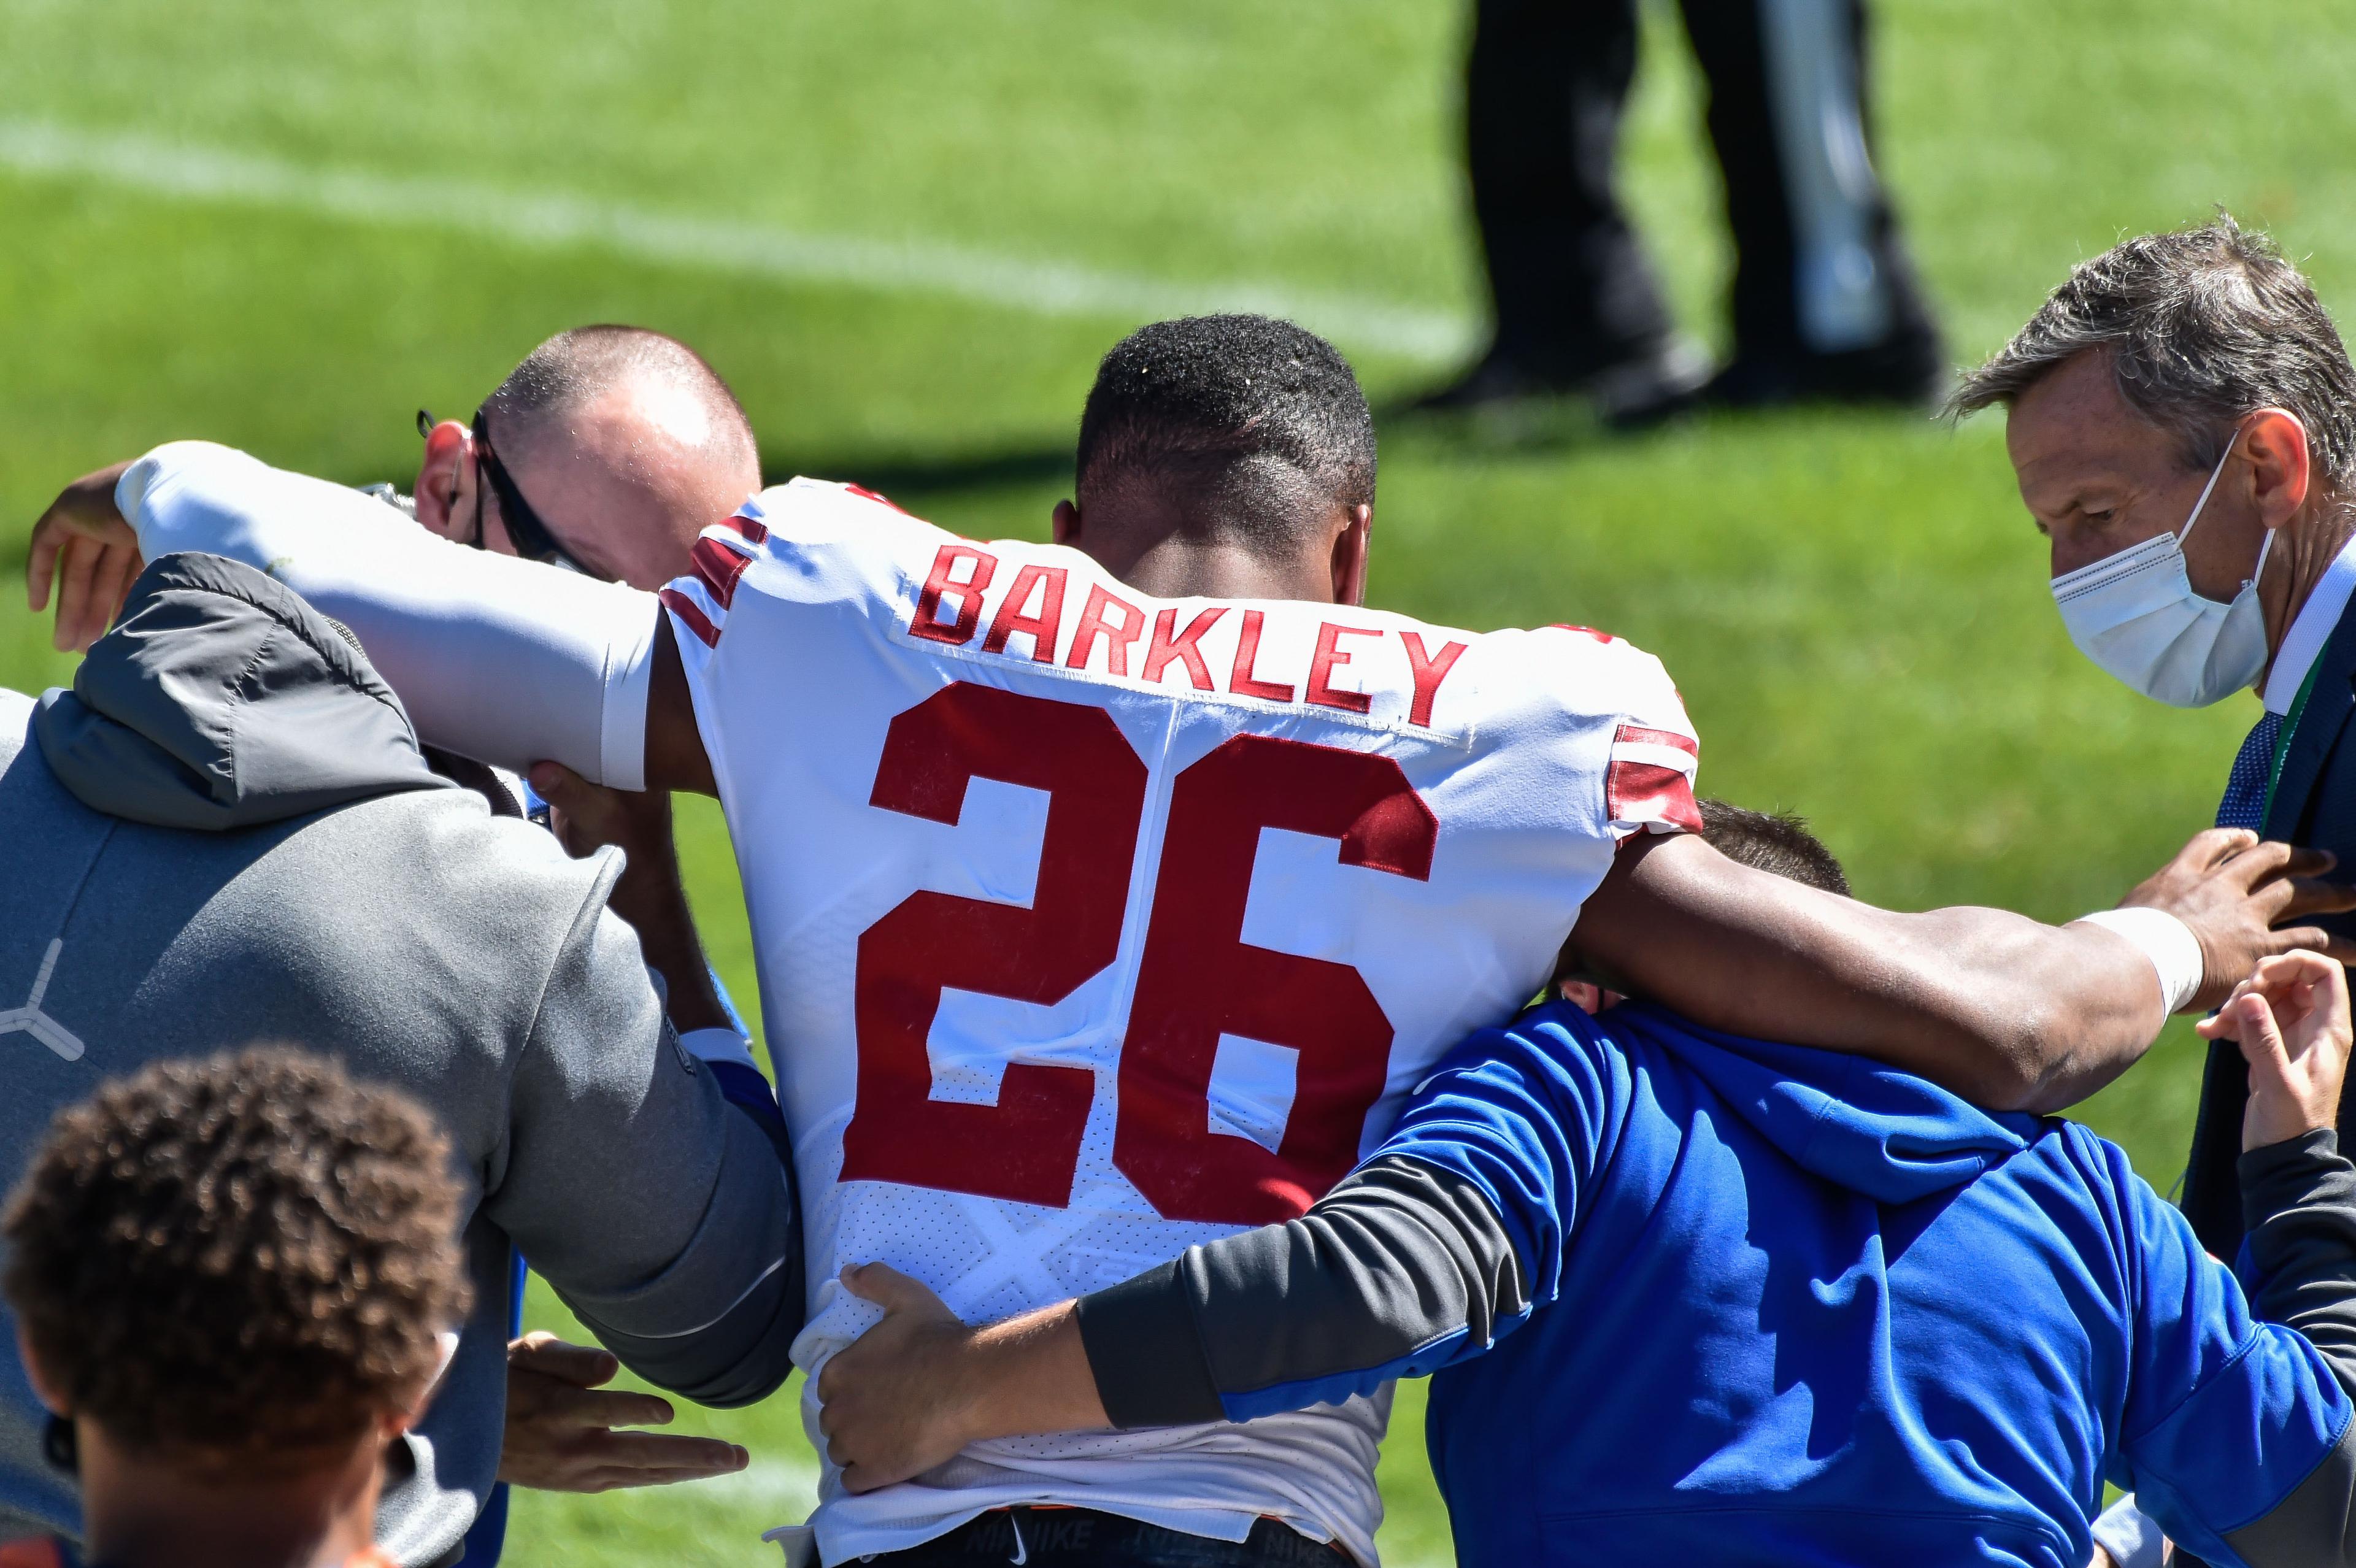 Giants RB Saquon Barkley needs help off the field after suffering injury / USA TODAY